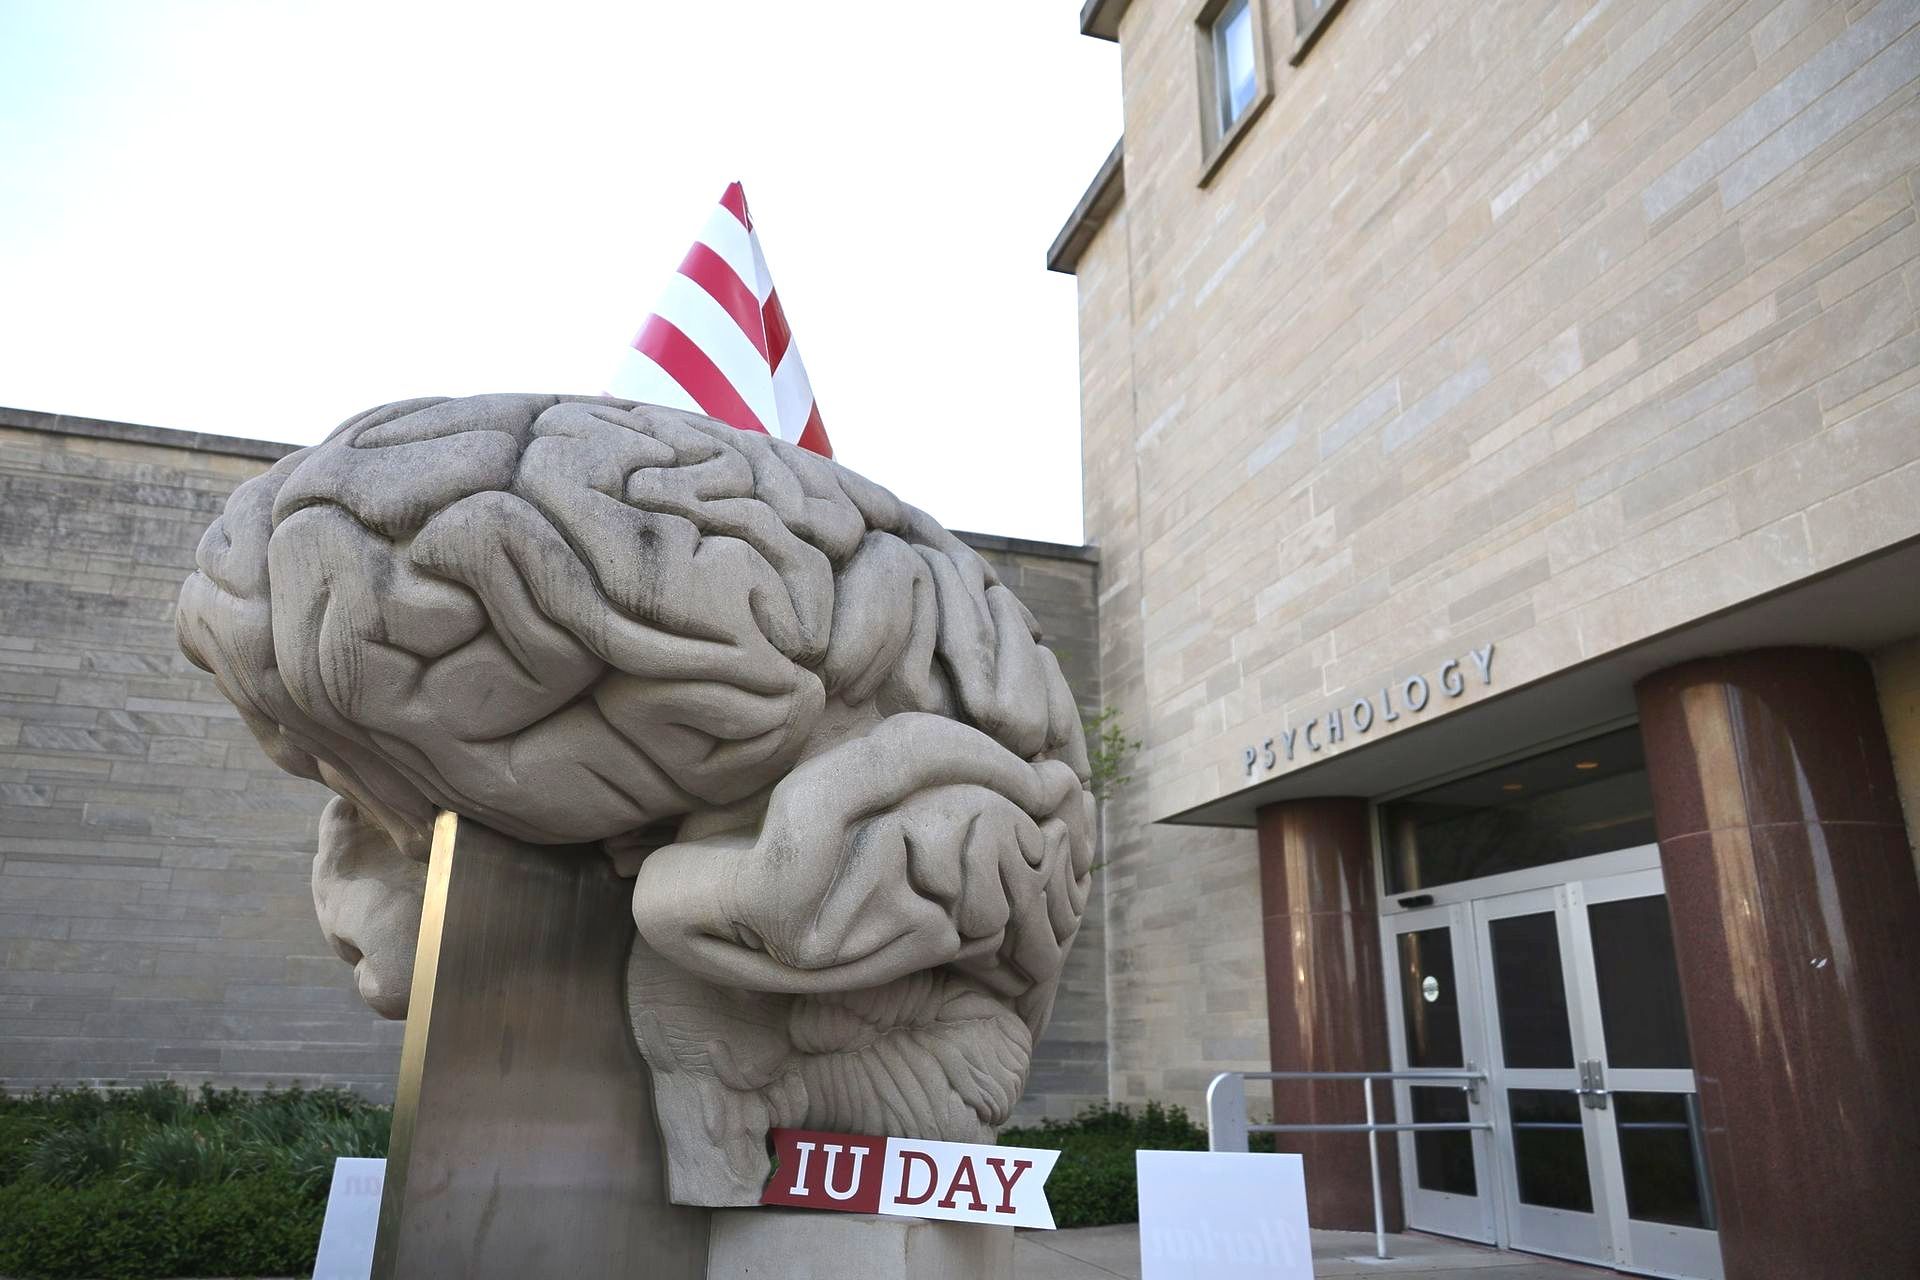 World's largest anatomically-accurate brain sculpture: Bloomington, Indiana